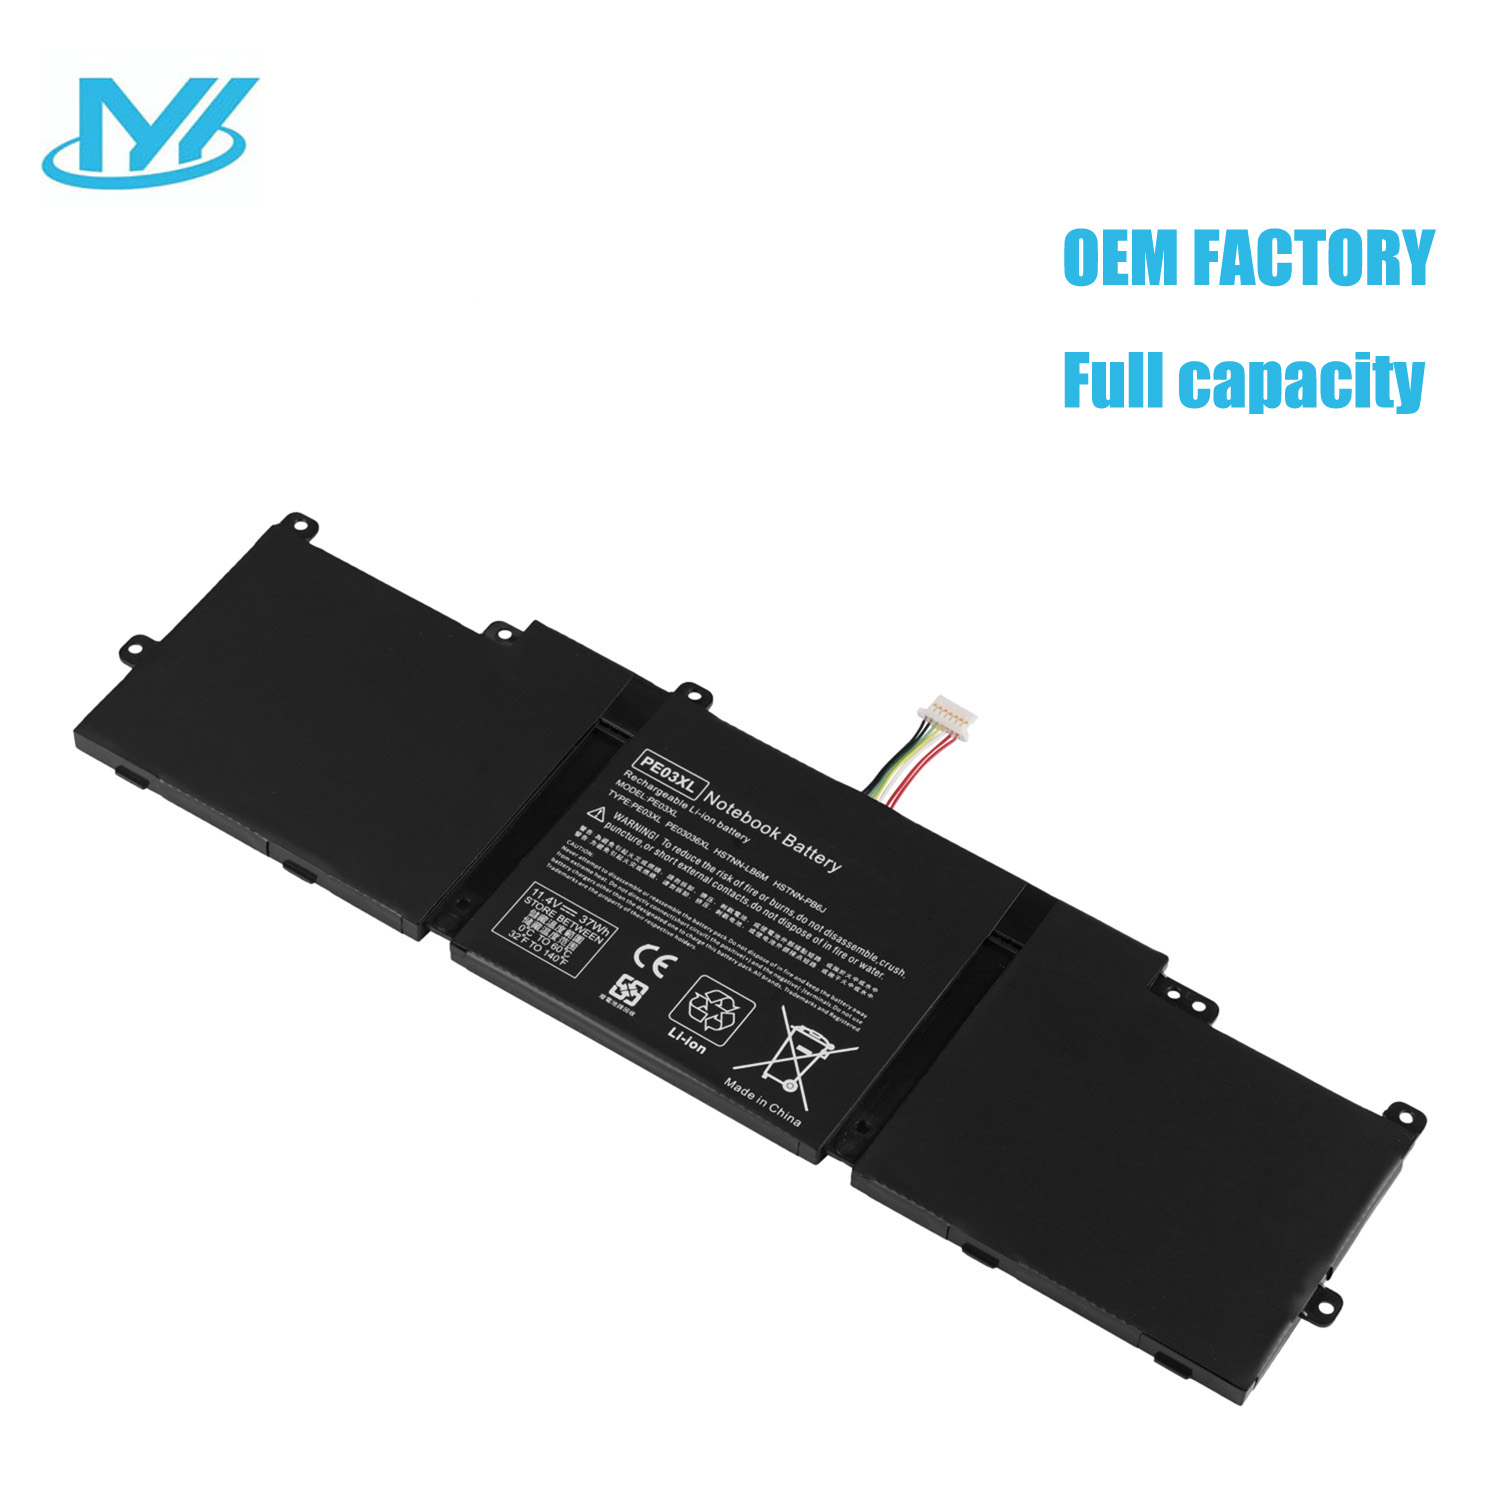 PE03XL rechargeable lithium ion Notebook battery Laptop battery for HP Chromebook 11 G1 G3 G4 767068-005 766801-42111.4V 37Wh 3cell